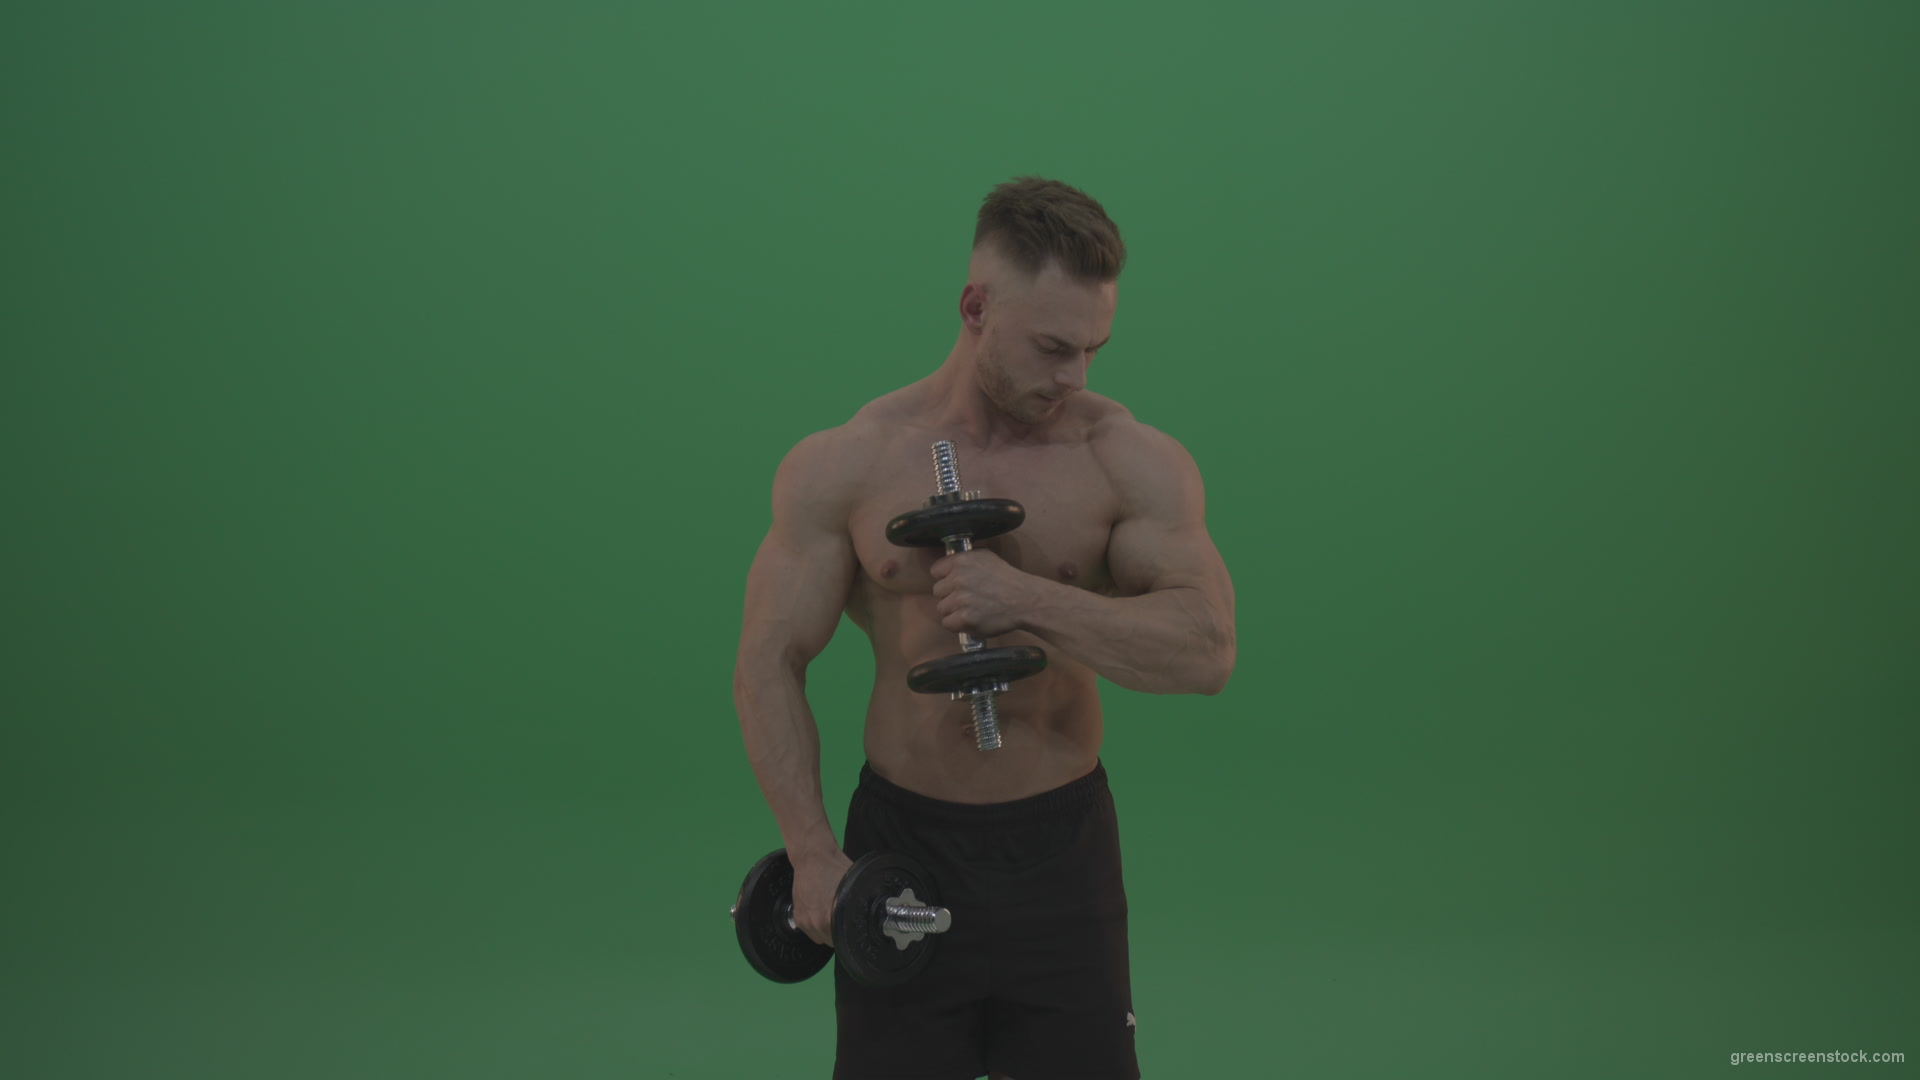 Young_Bodybuilder_Working_Out_With_Two_Handed_Dumbbell_Biceps_Exercises_On_Green_Screen_Wall_Background_007 Green Screen Stock